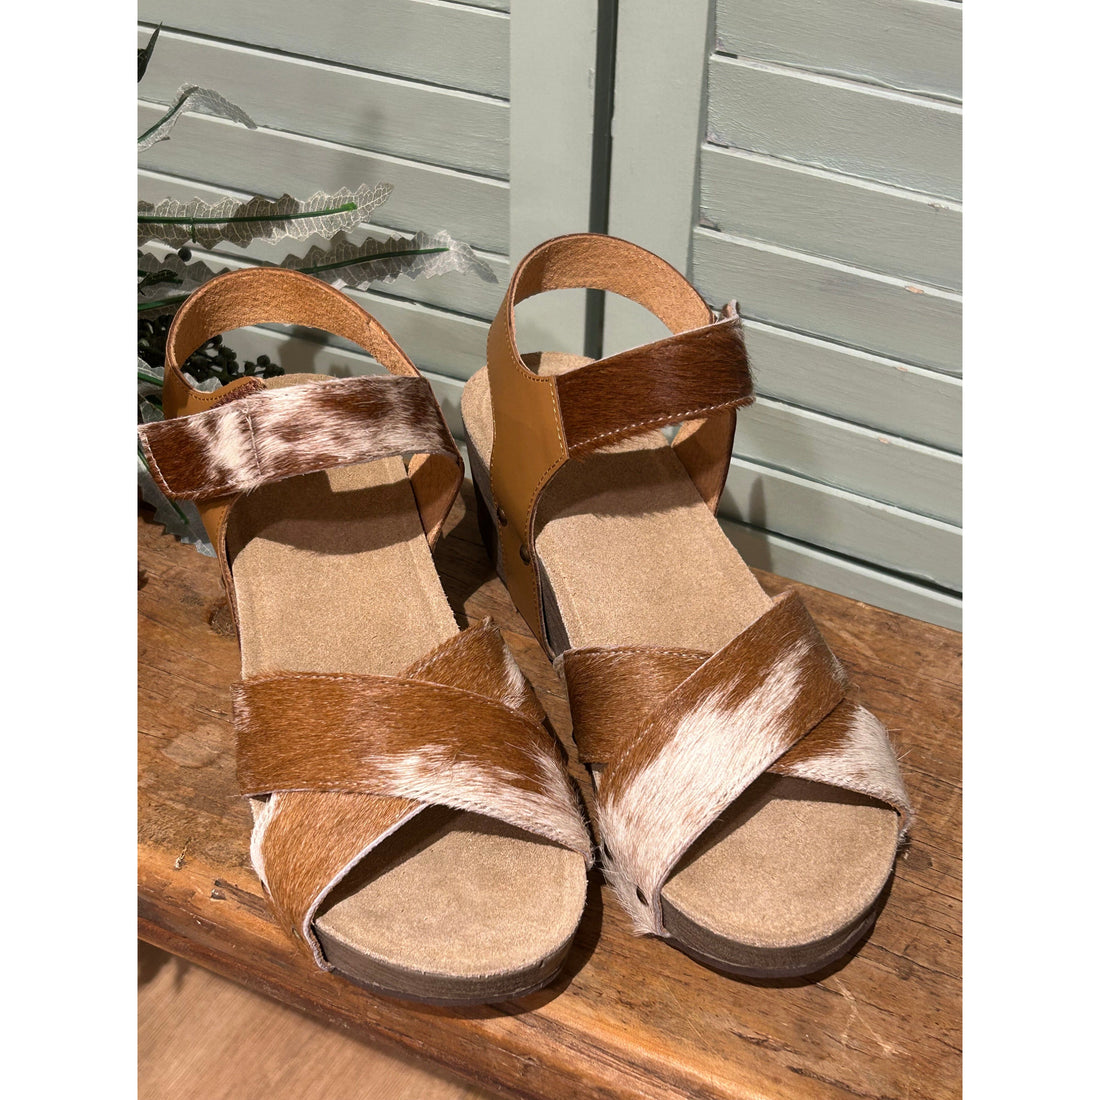 Tan and White Cowhide Wedges Size 38 